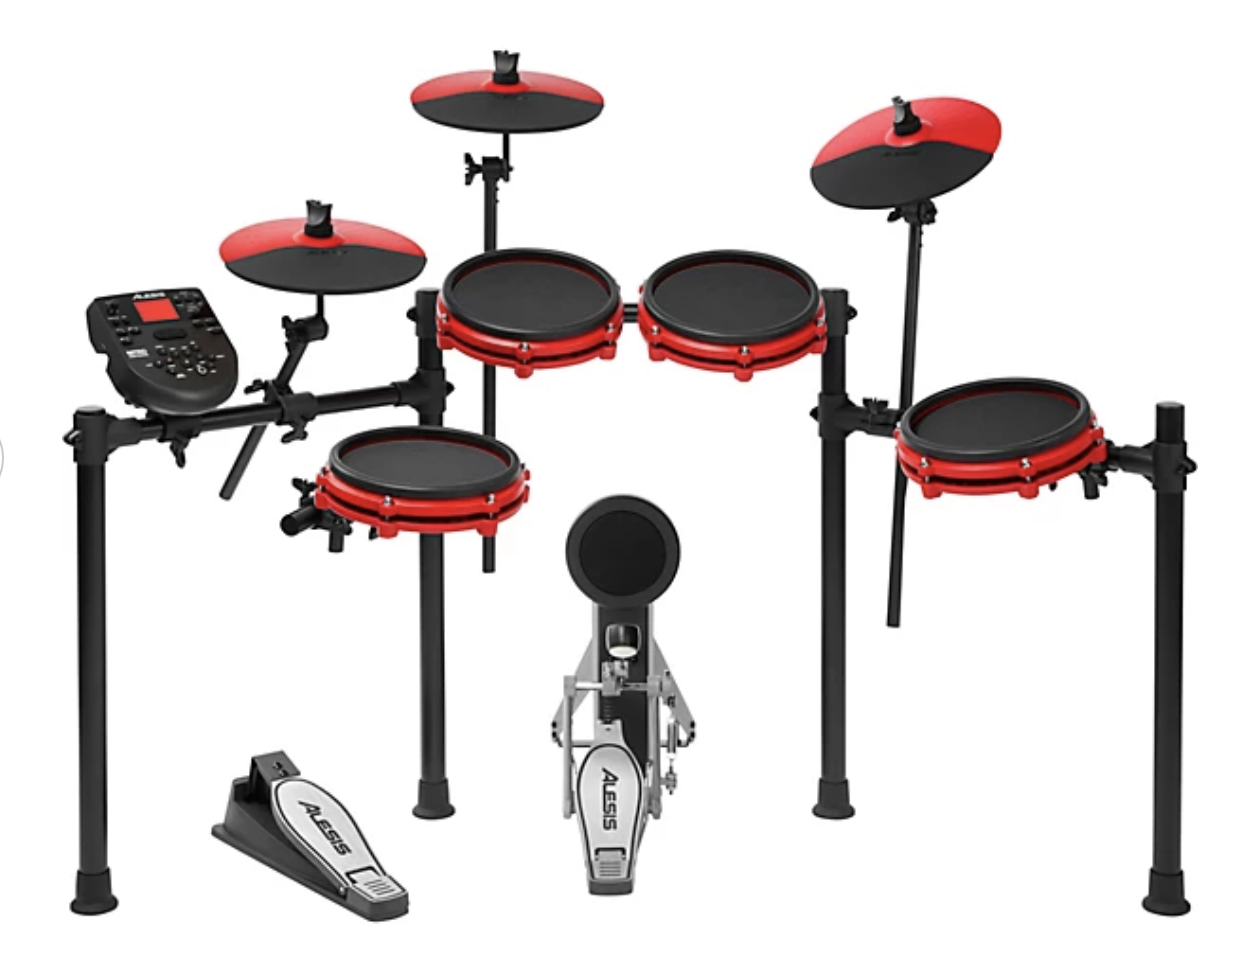 Save on electronic drum sets with our Guitar Center deals